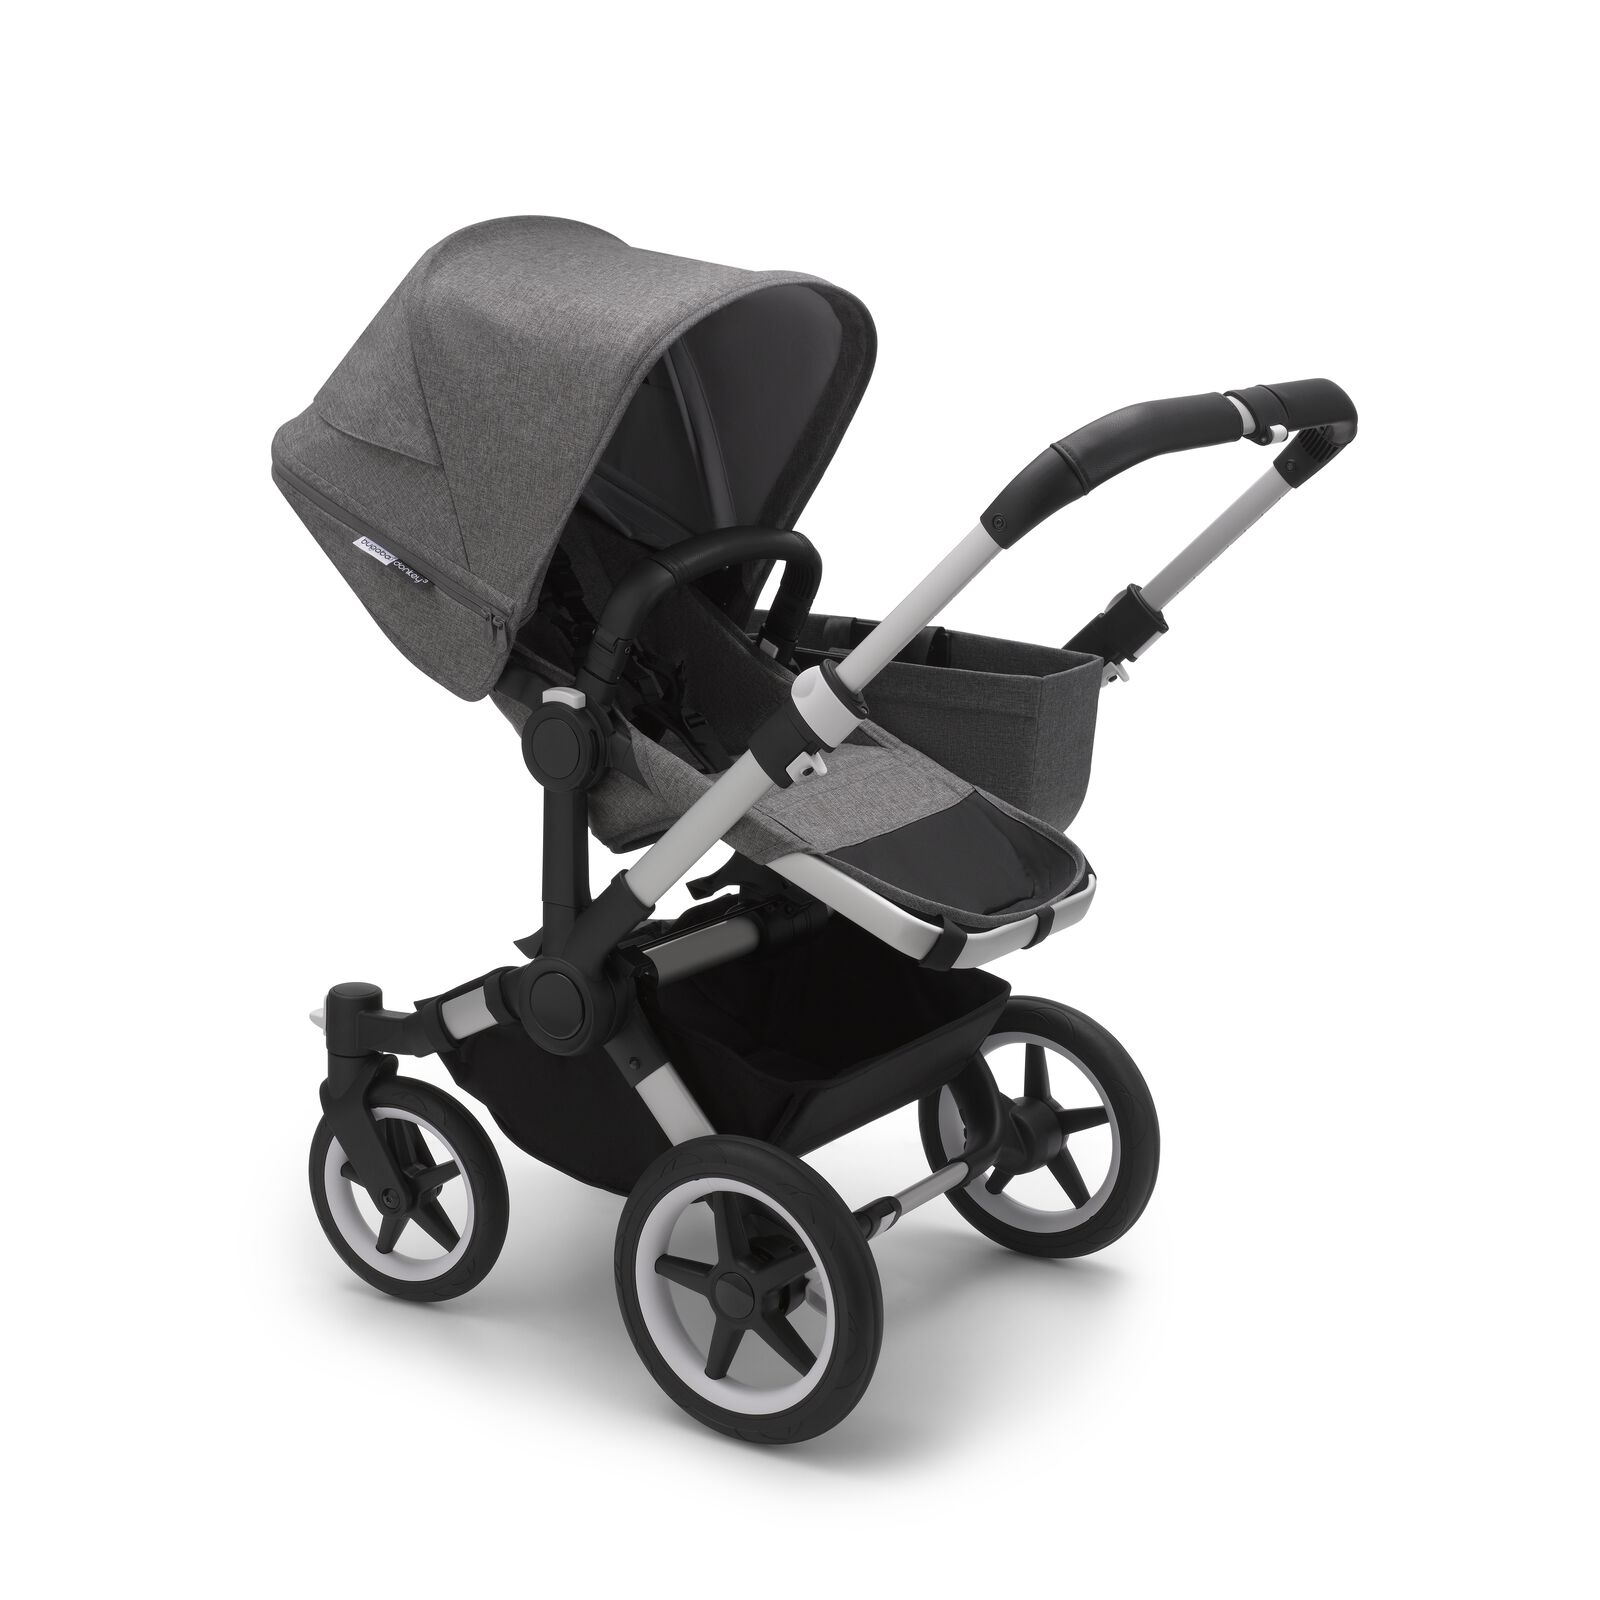 Bugaboo Donkey 3 mono carrycot and seat pushchair - View 1